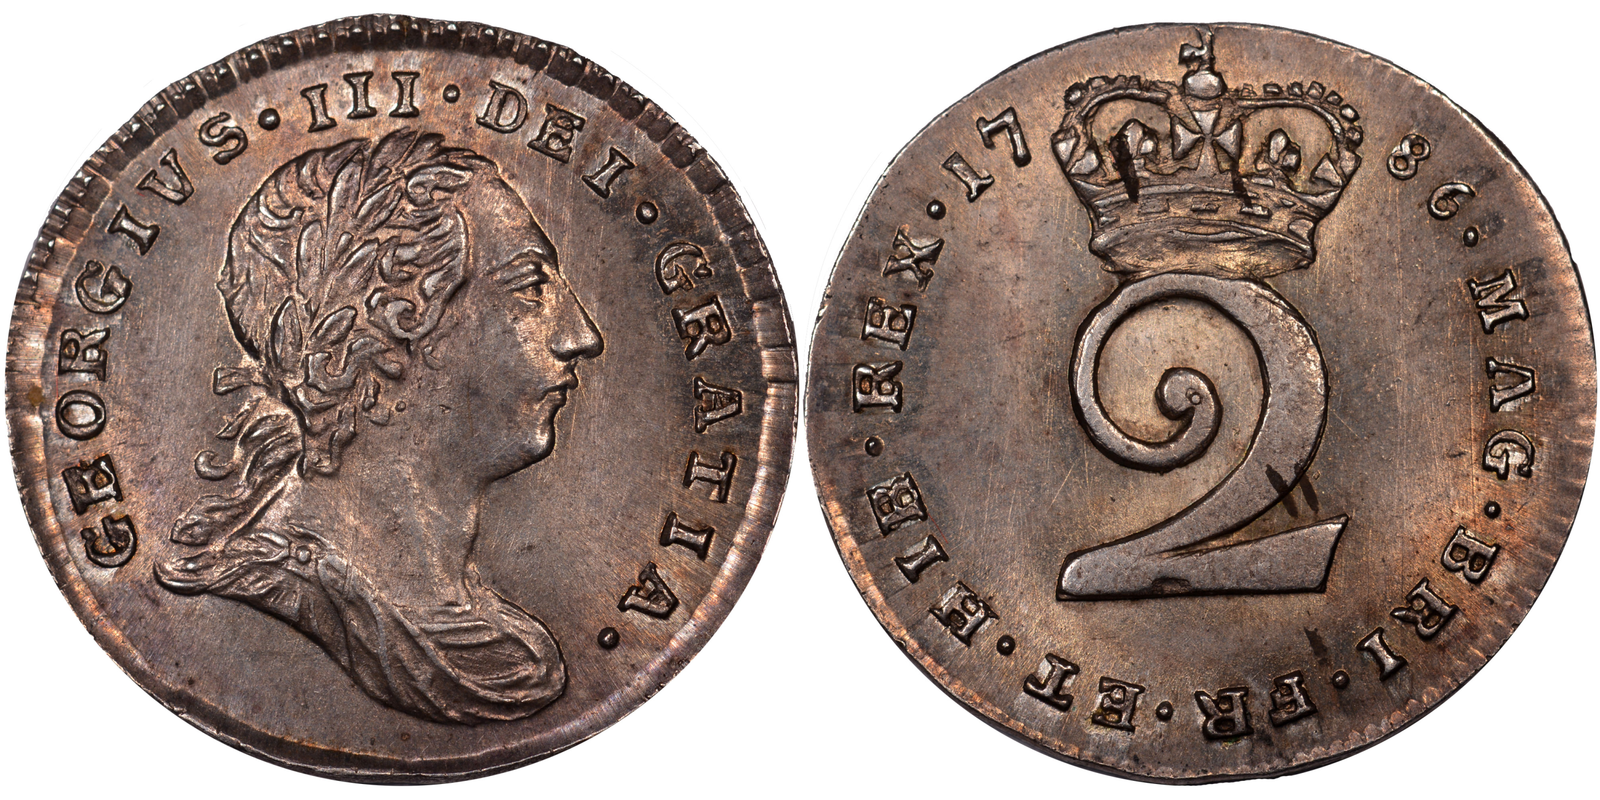 Britain is not looking for easy ways...Part 3 - My, Numismatics, Numismatists, Great Britain, Story, Interesting, Longpost